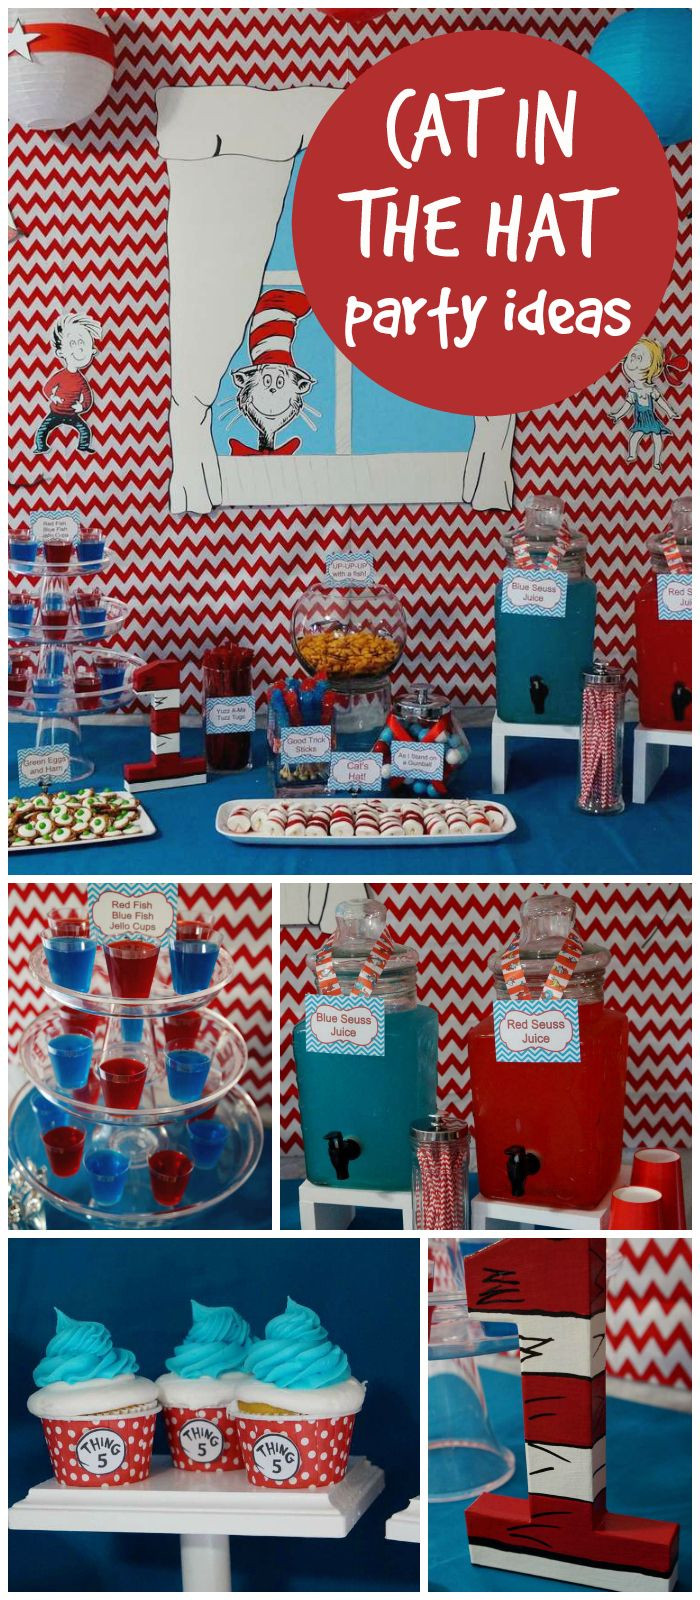 Cat In The Hat Birthday Party Ideas
 Cat in the Hat Birthday "Lucas s Cat in the Hat 1st